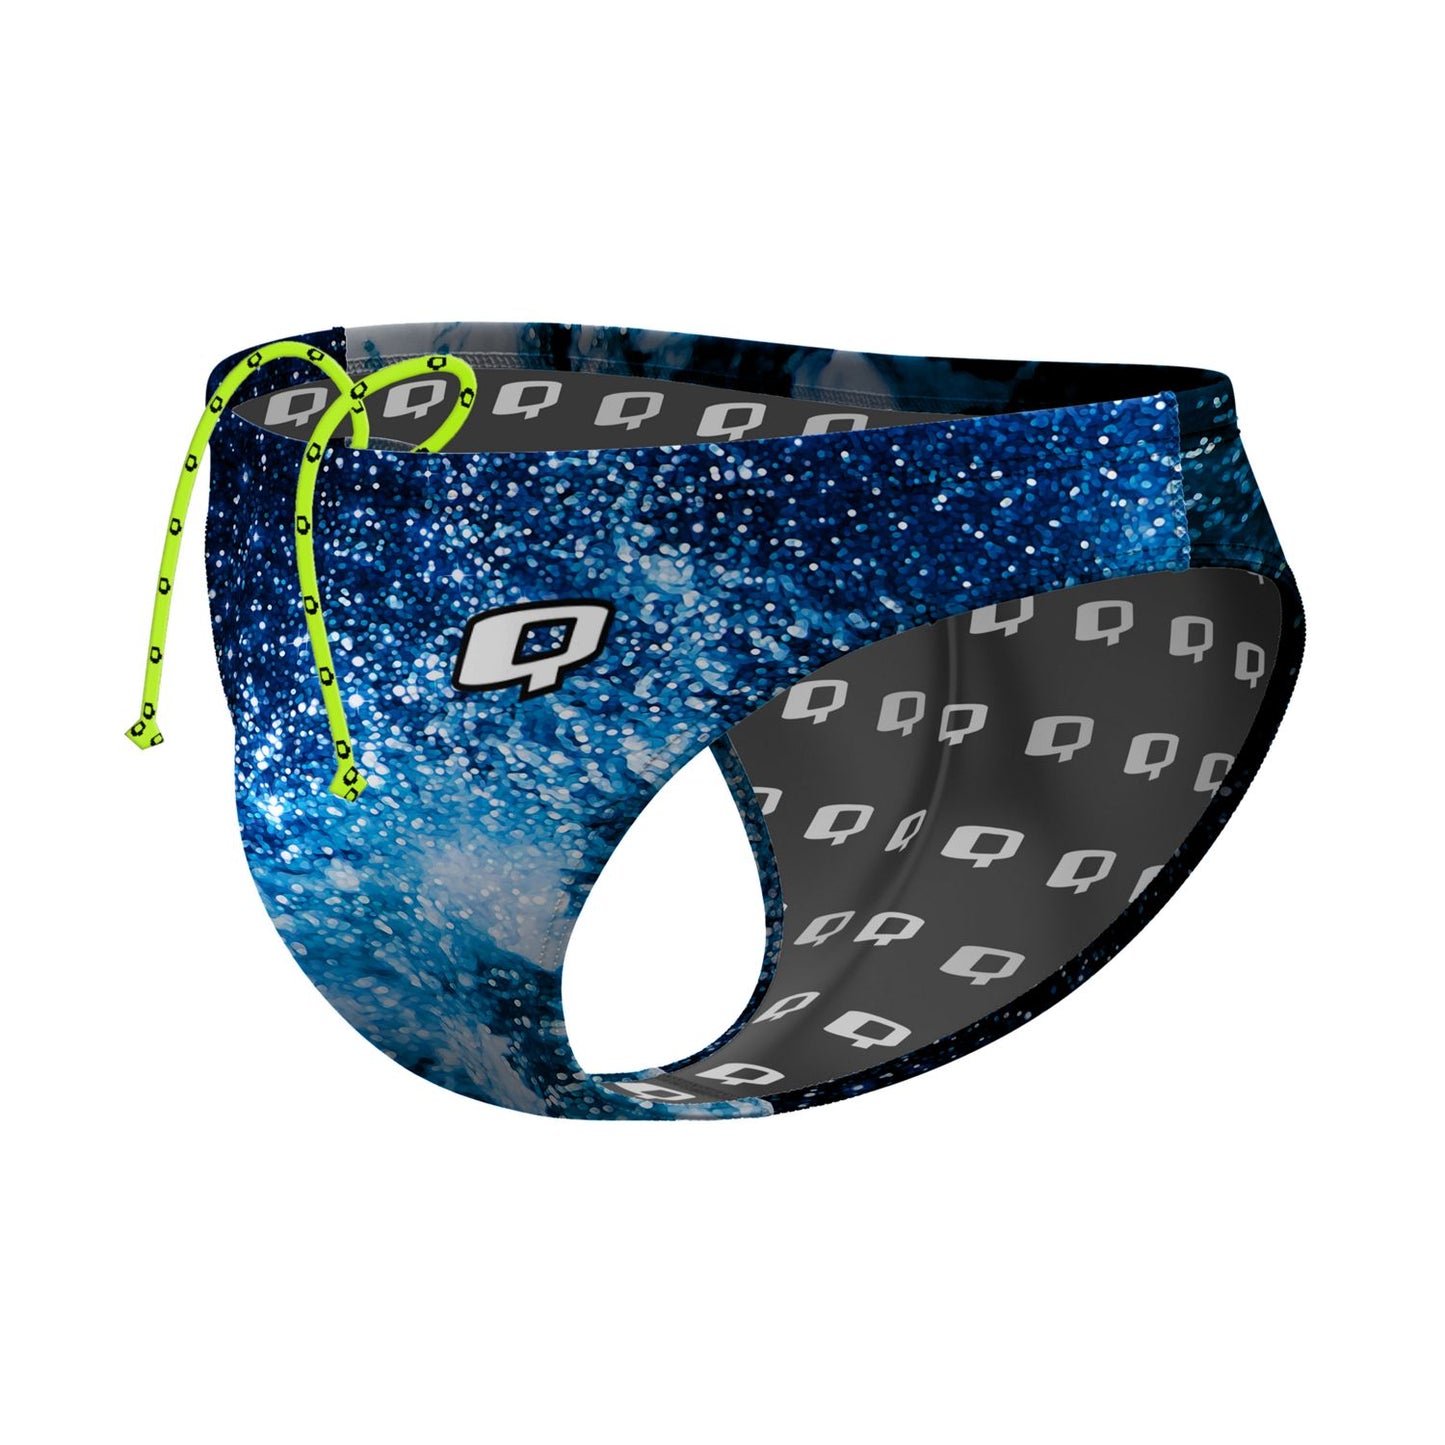 Cosmic Waves Waterpolo Brief